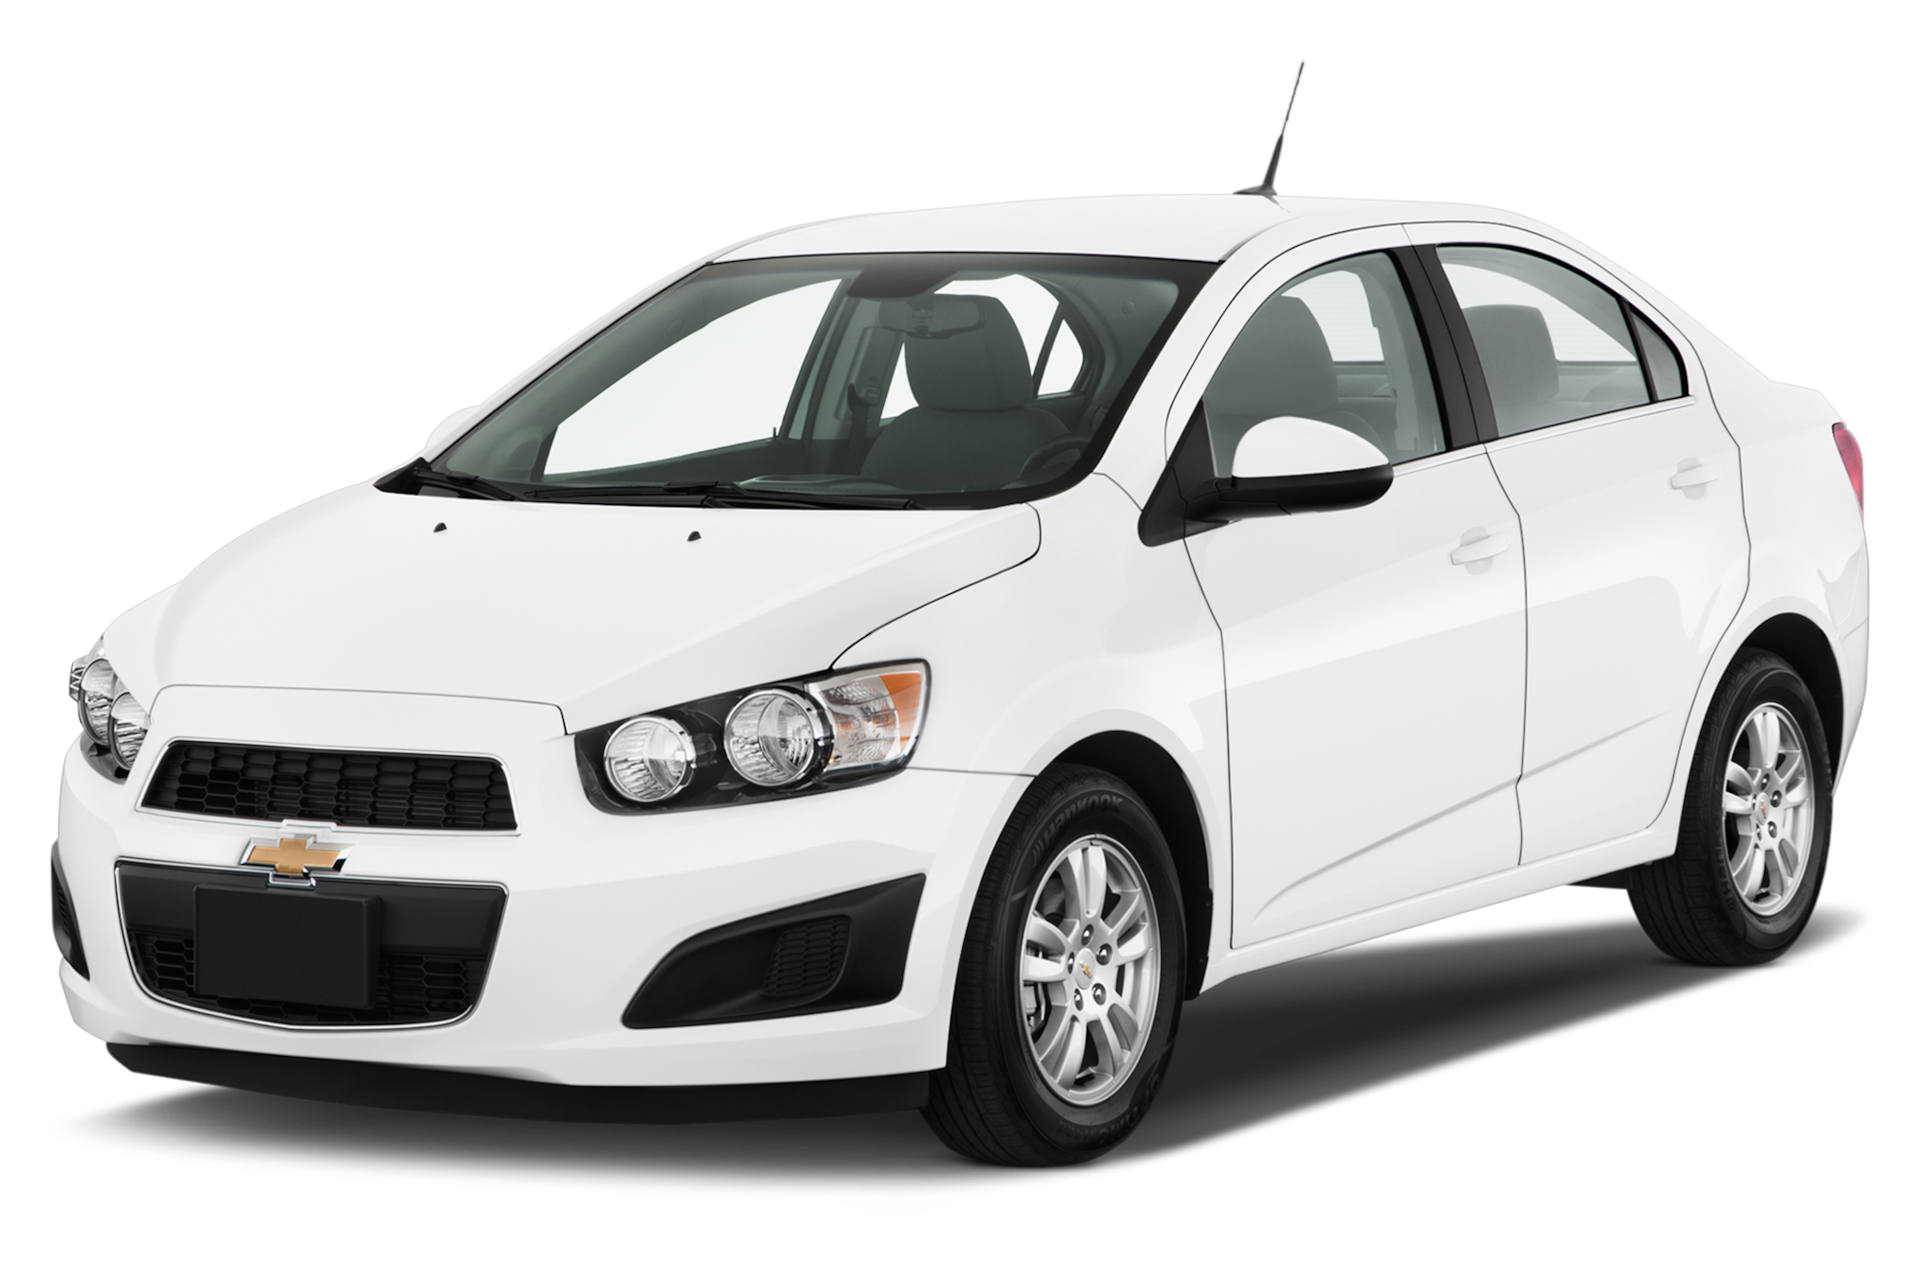 2013 Chevrolet Sonic Prices, Reviews, and Photos - MotorTrend